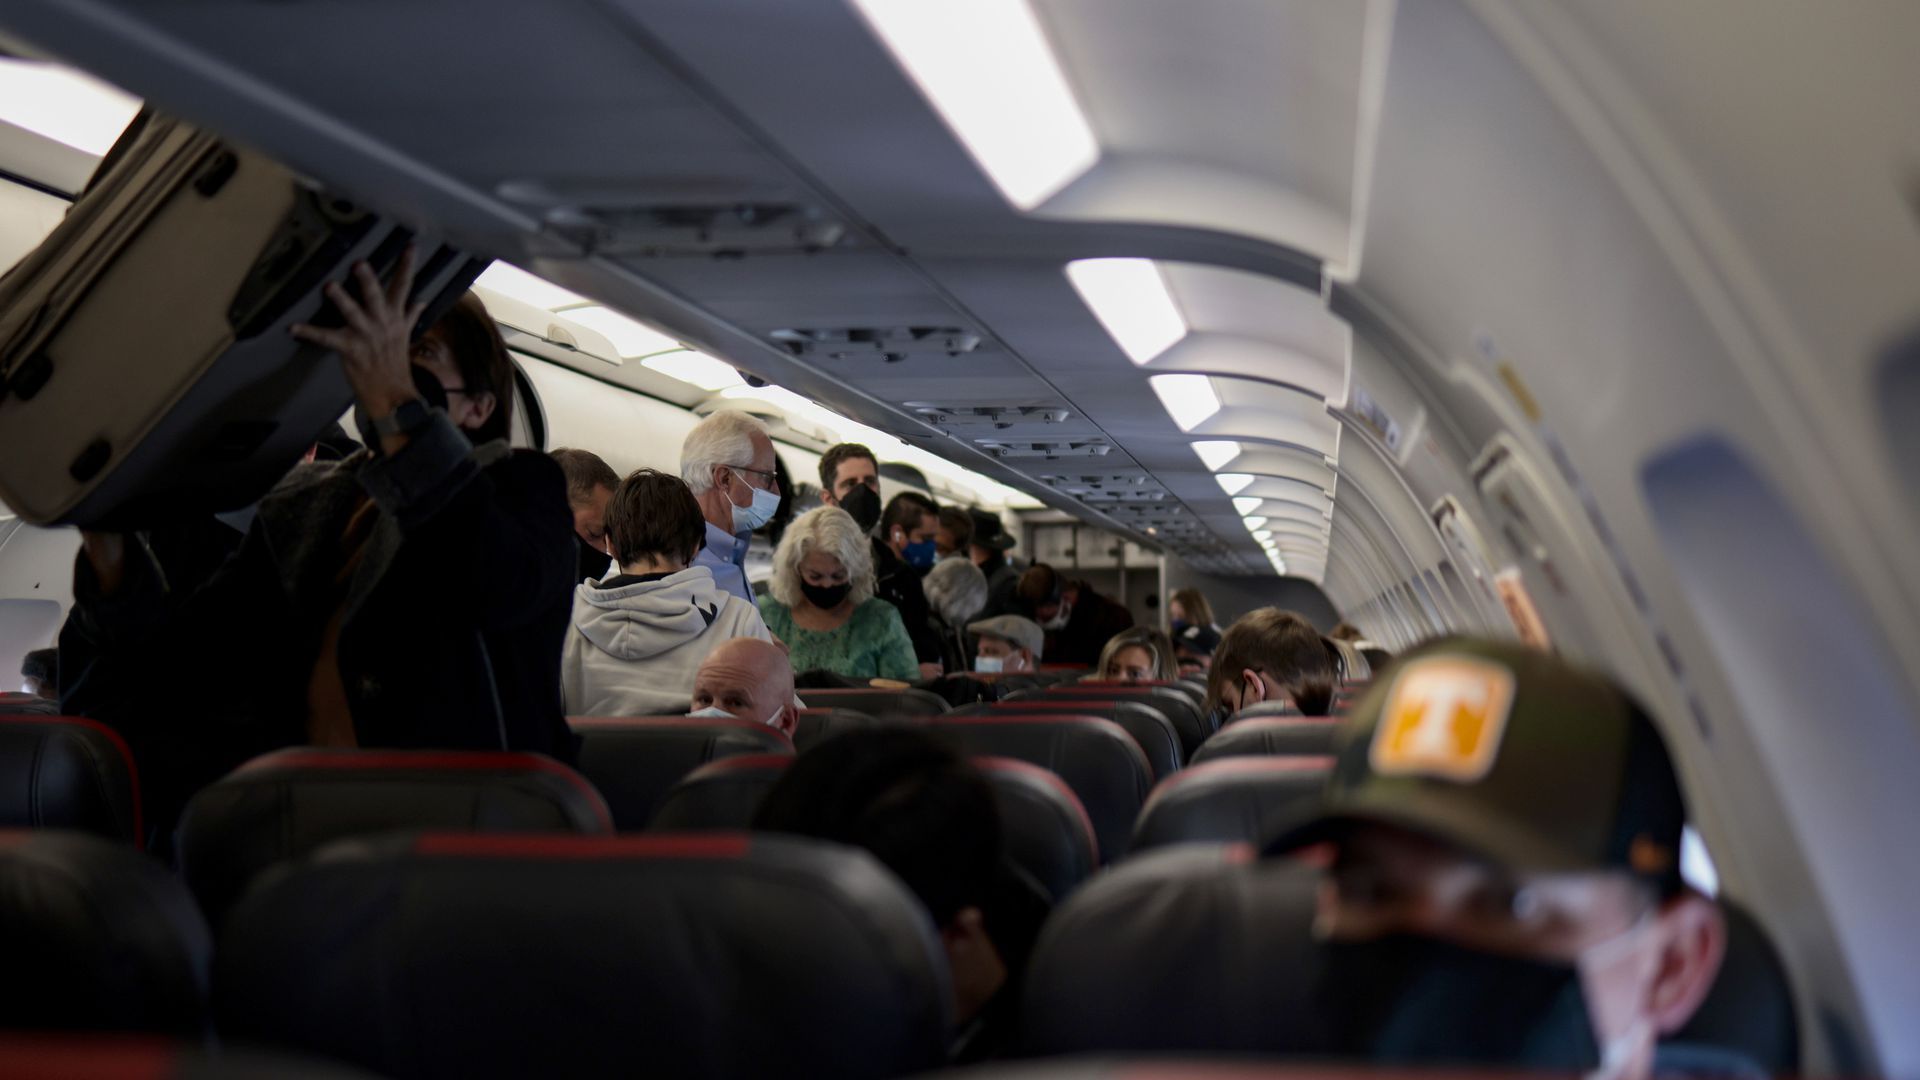 people seen retrieving luggage from overhead bins on an airplane.